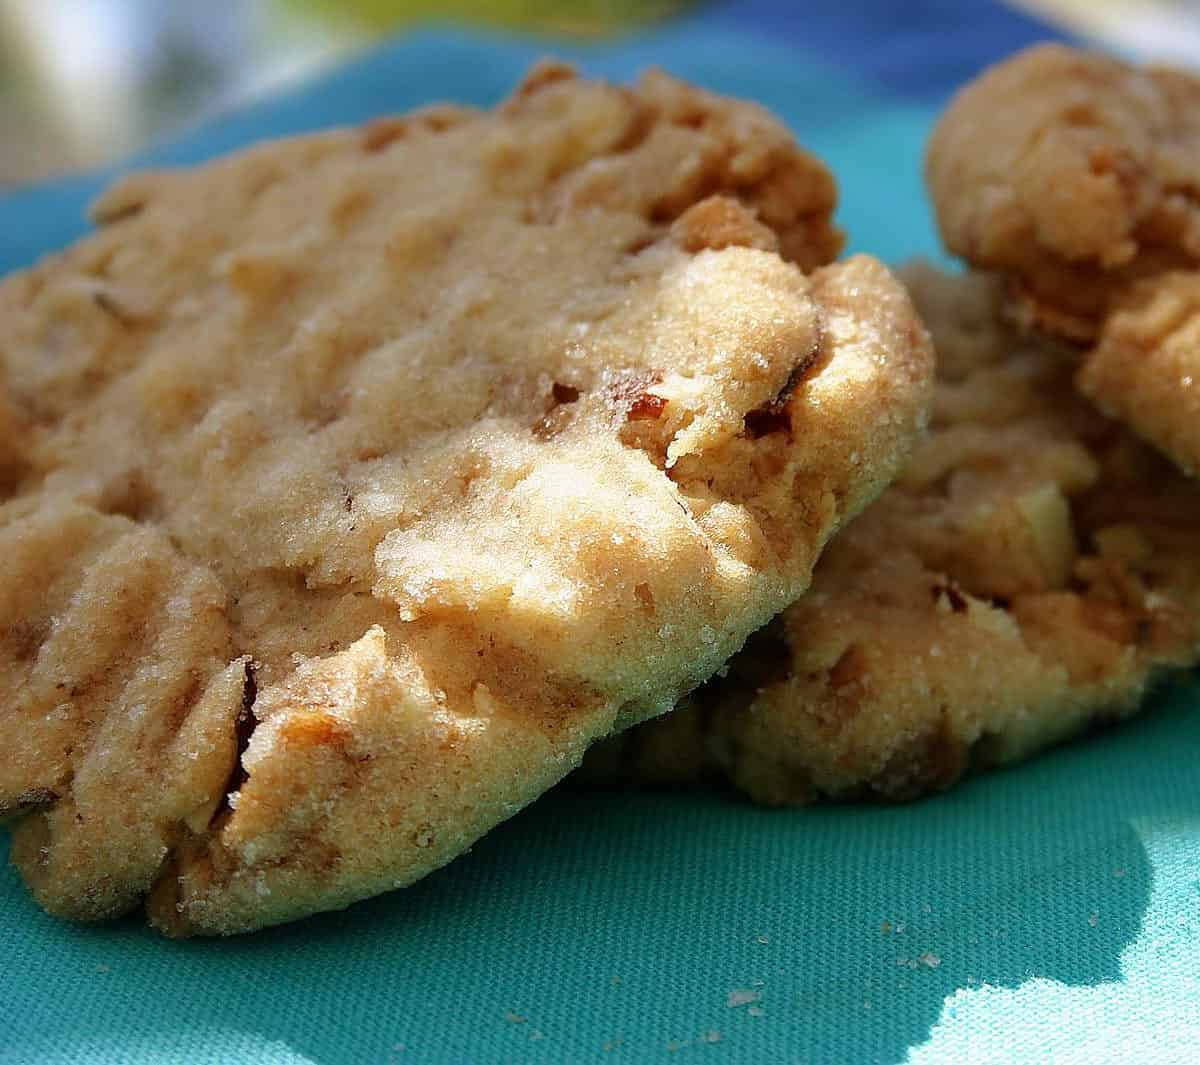  A cookie that's crunchy on the outside yet soft and gooey on the inside.